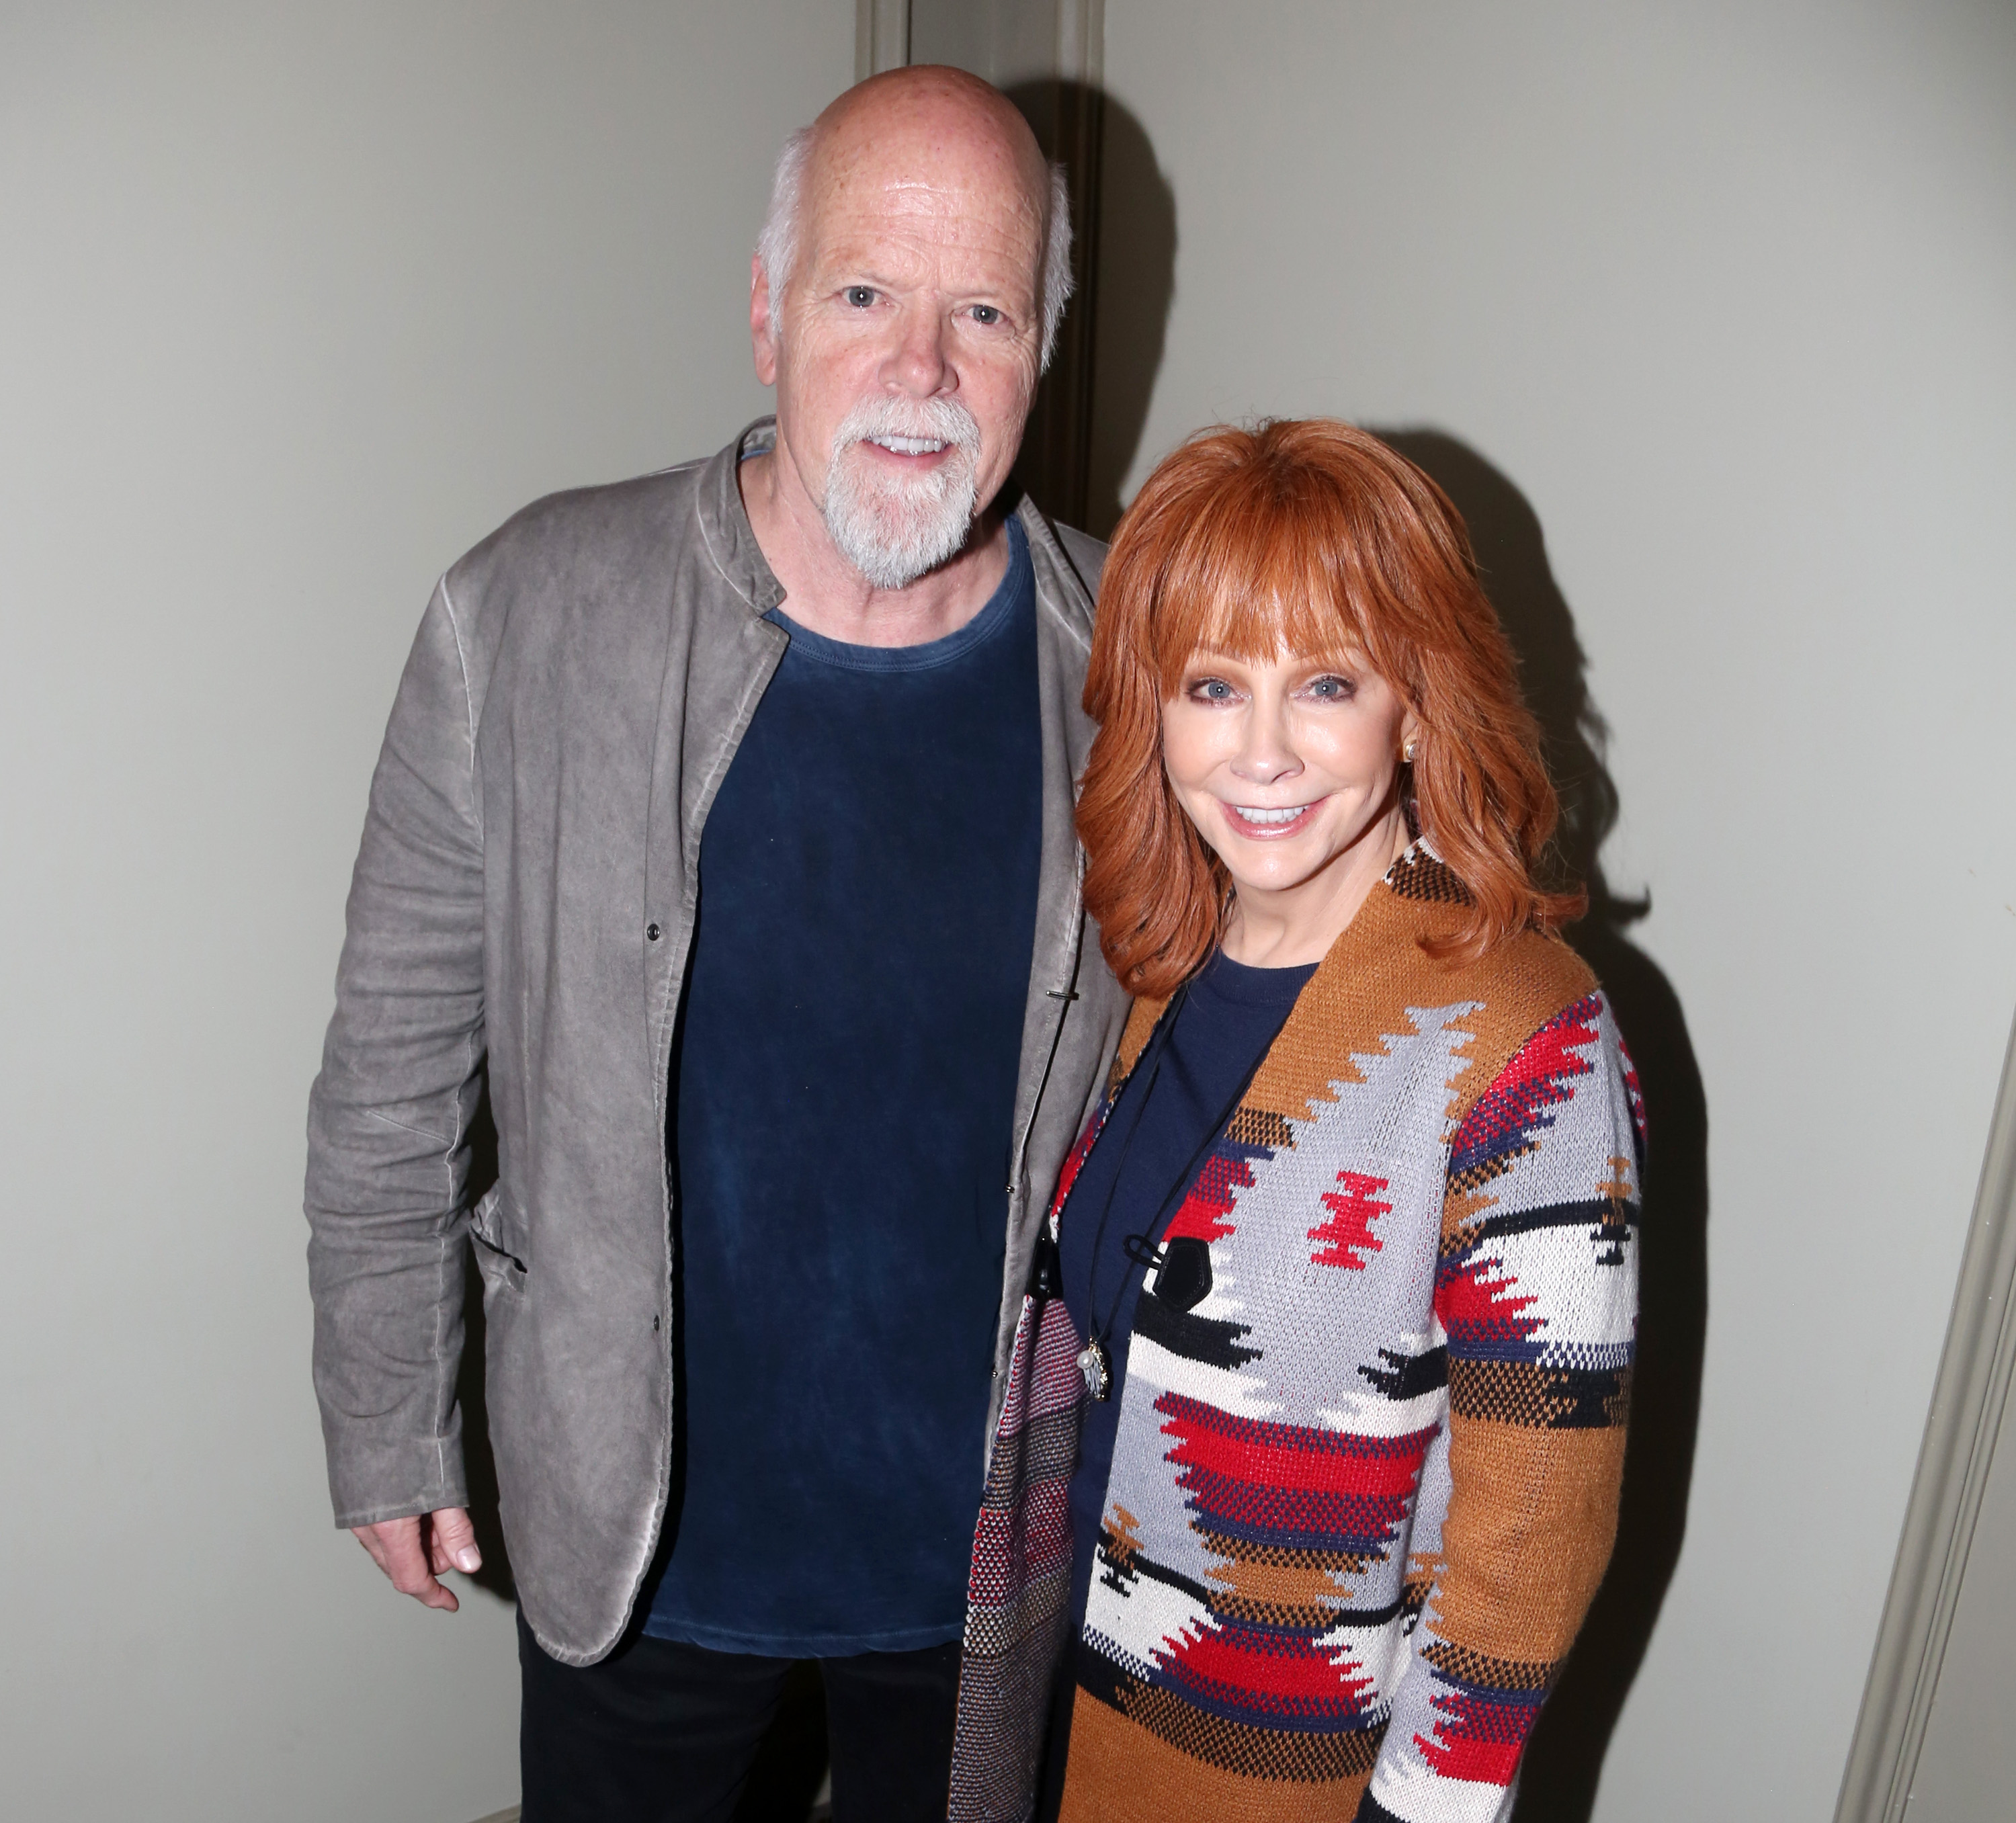 Reba McEntire and Rex Linn pose backstage at the new musical "Shucked" on Broadway